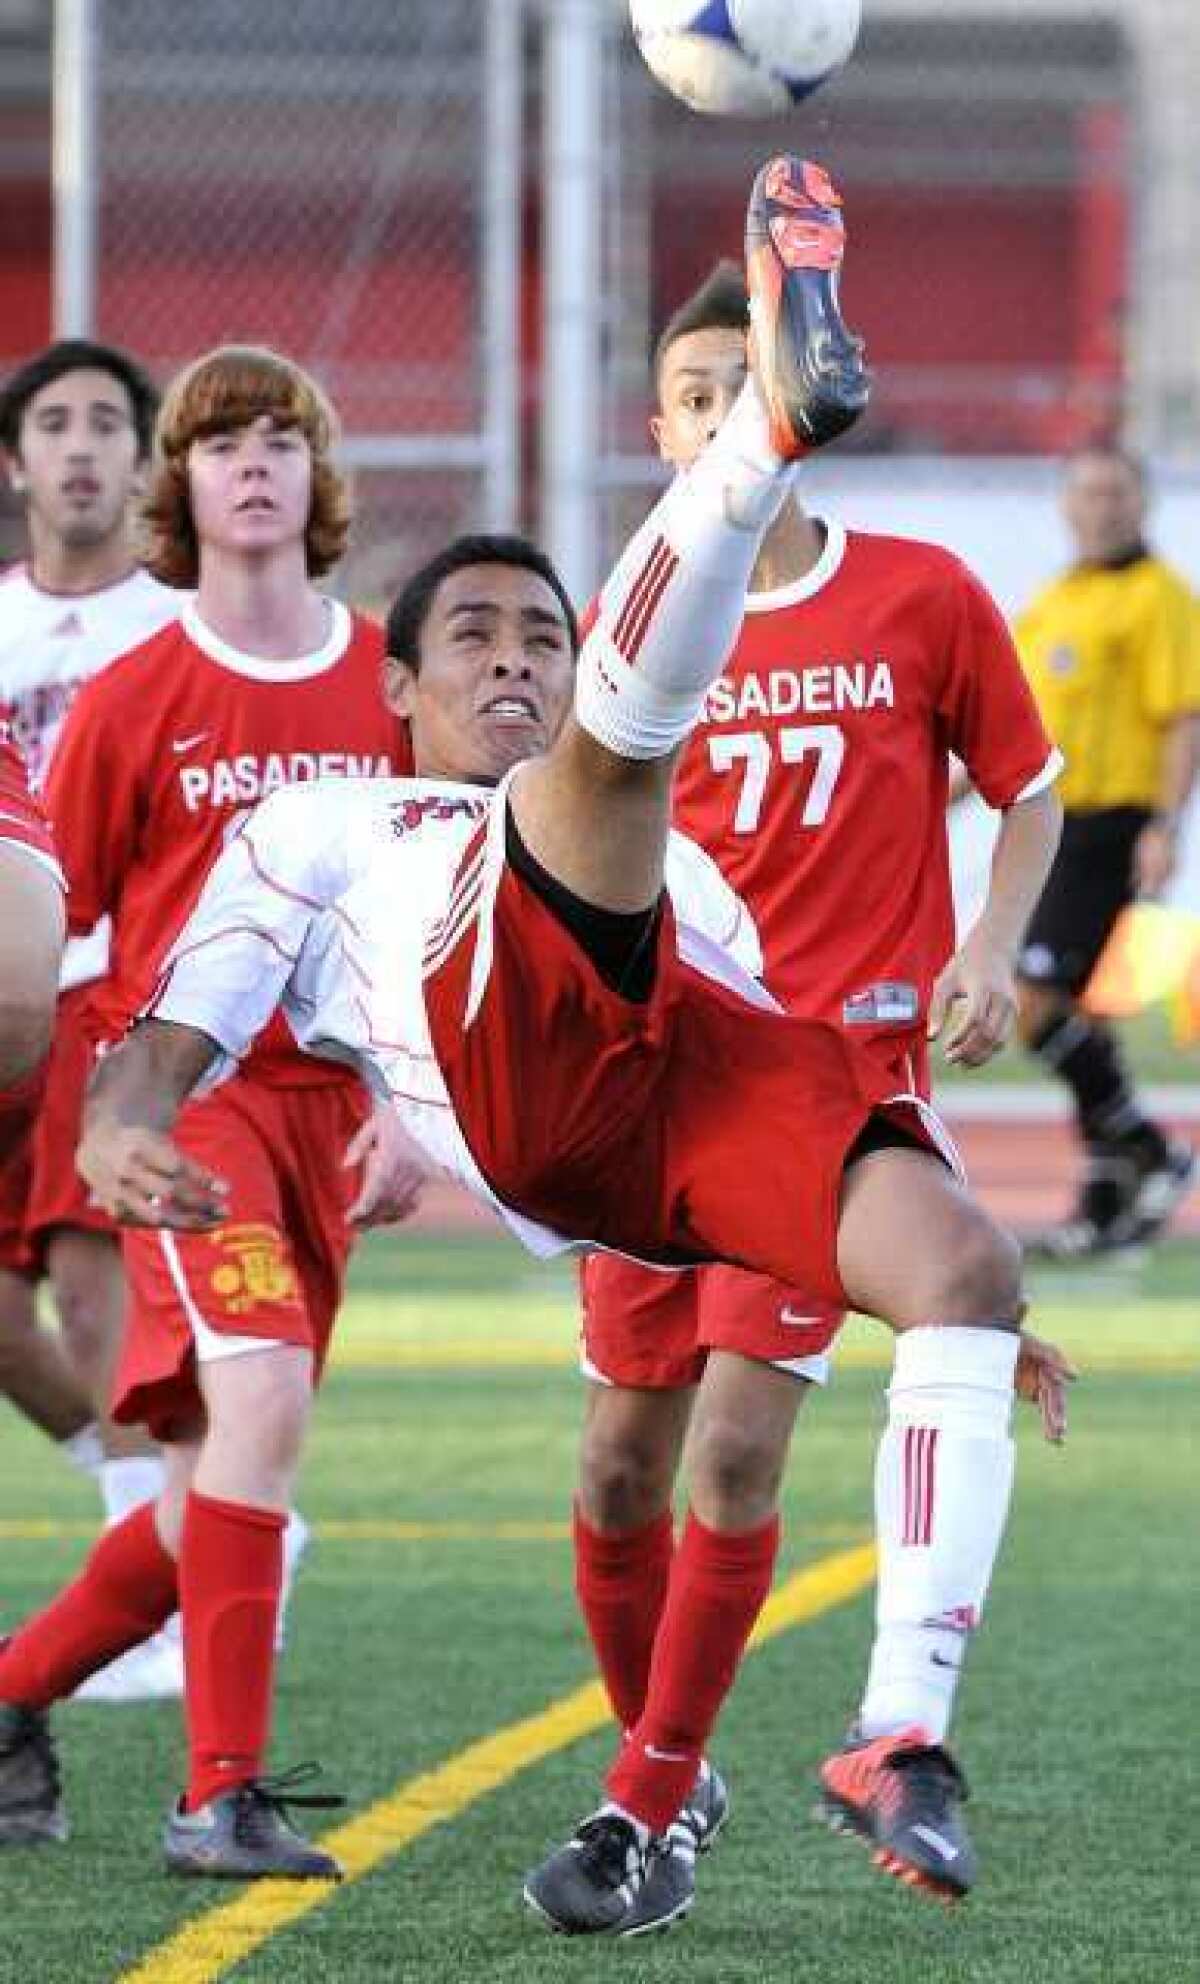 Burroughs' Manny Celio leans and jumps to attempt a bicycle kick shot towards goal against Pasadena in the second half in a Pacific League boys soccer match at Burroughs High School in Burbank on Monday, January 28, 2013. Pasadena won the match 3-1.